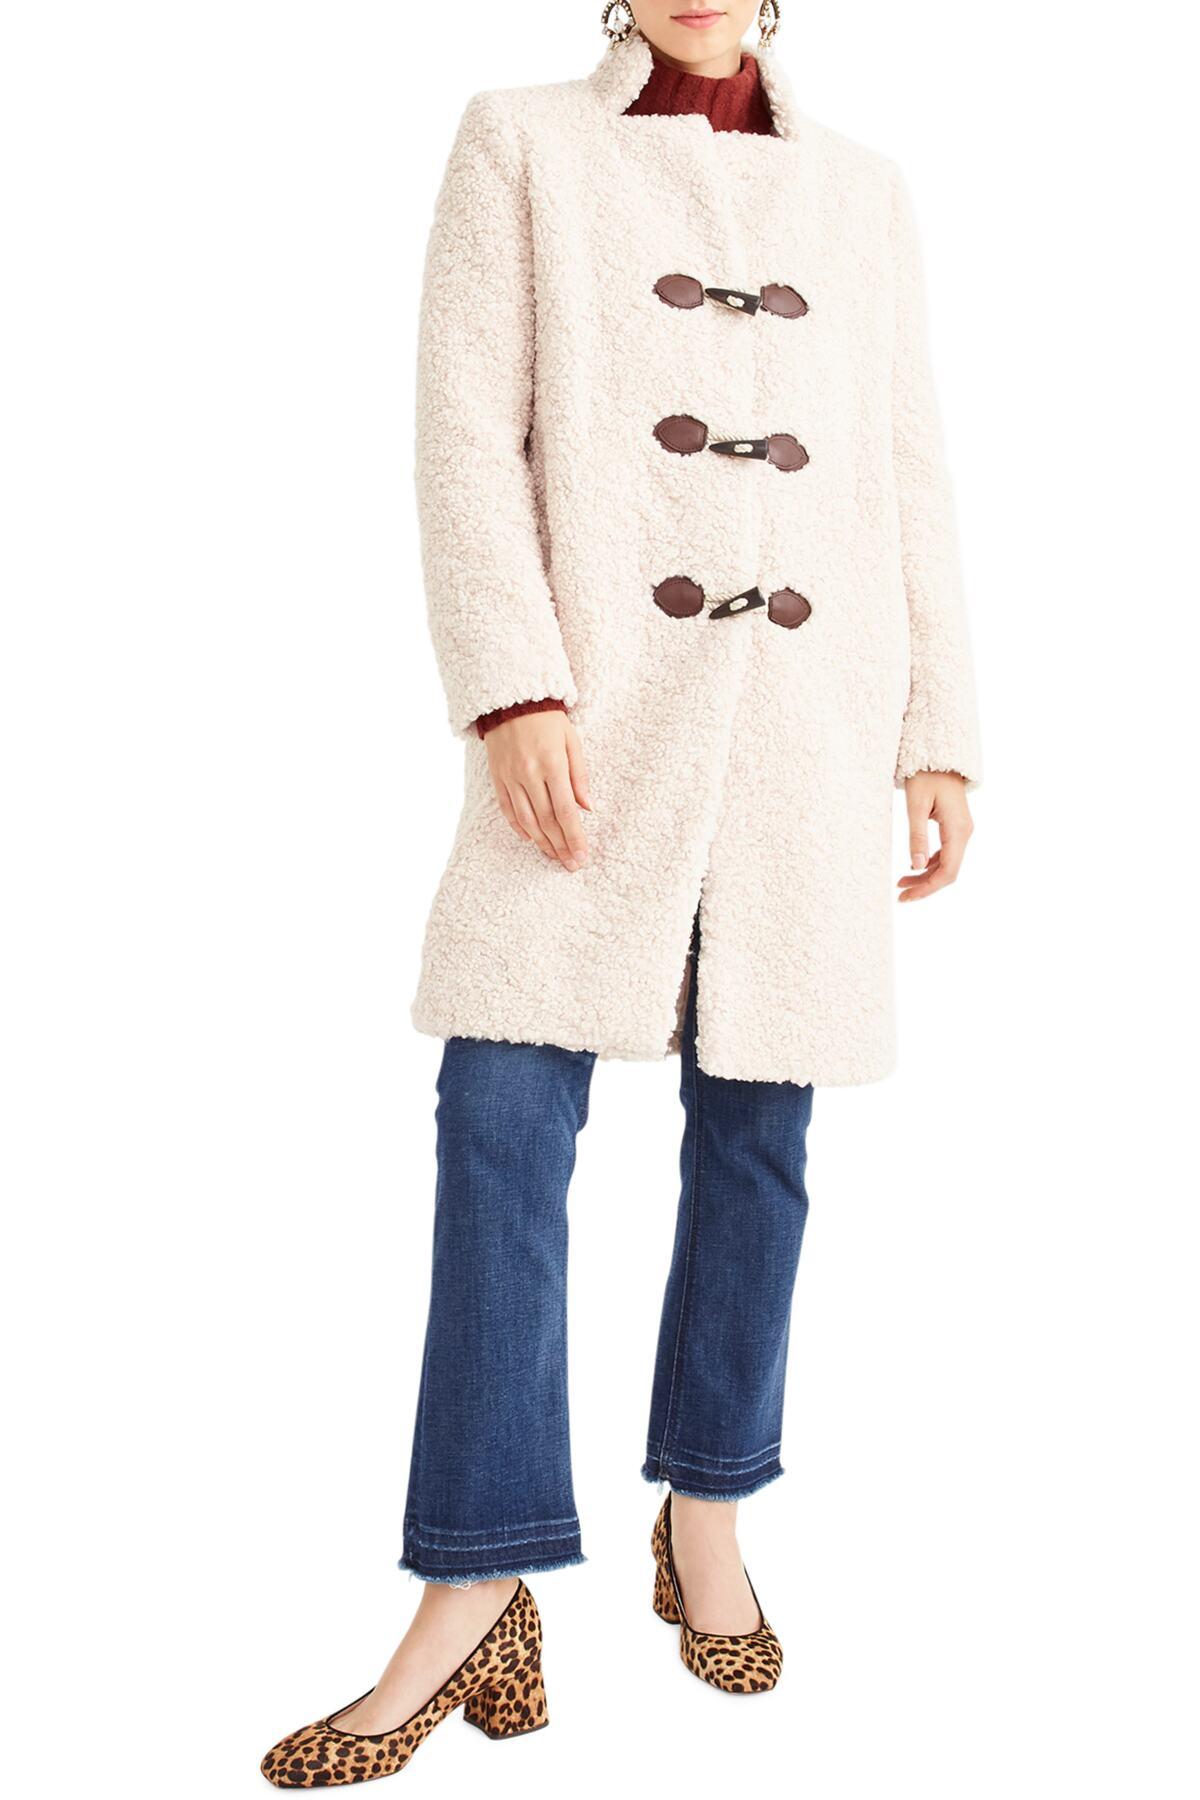 J.Crew Faux Shearling Toggle Coat in Natural - Lyst